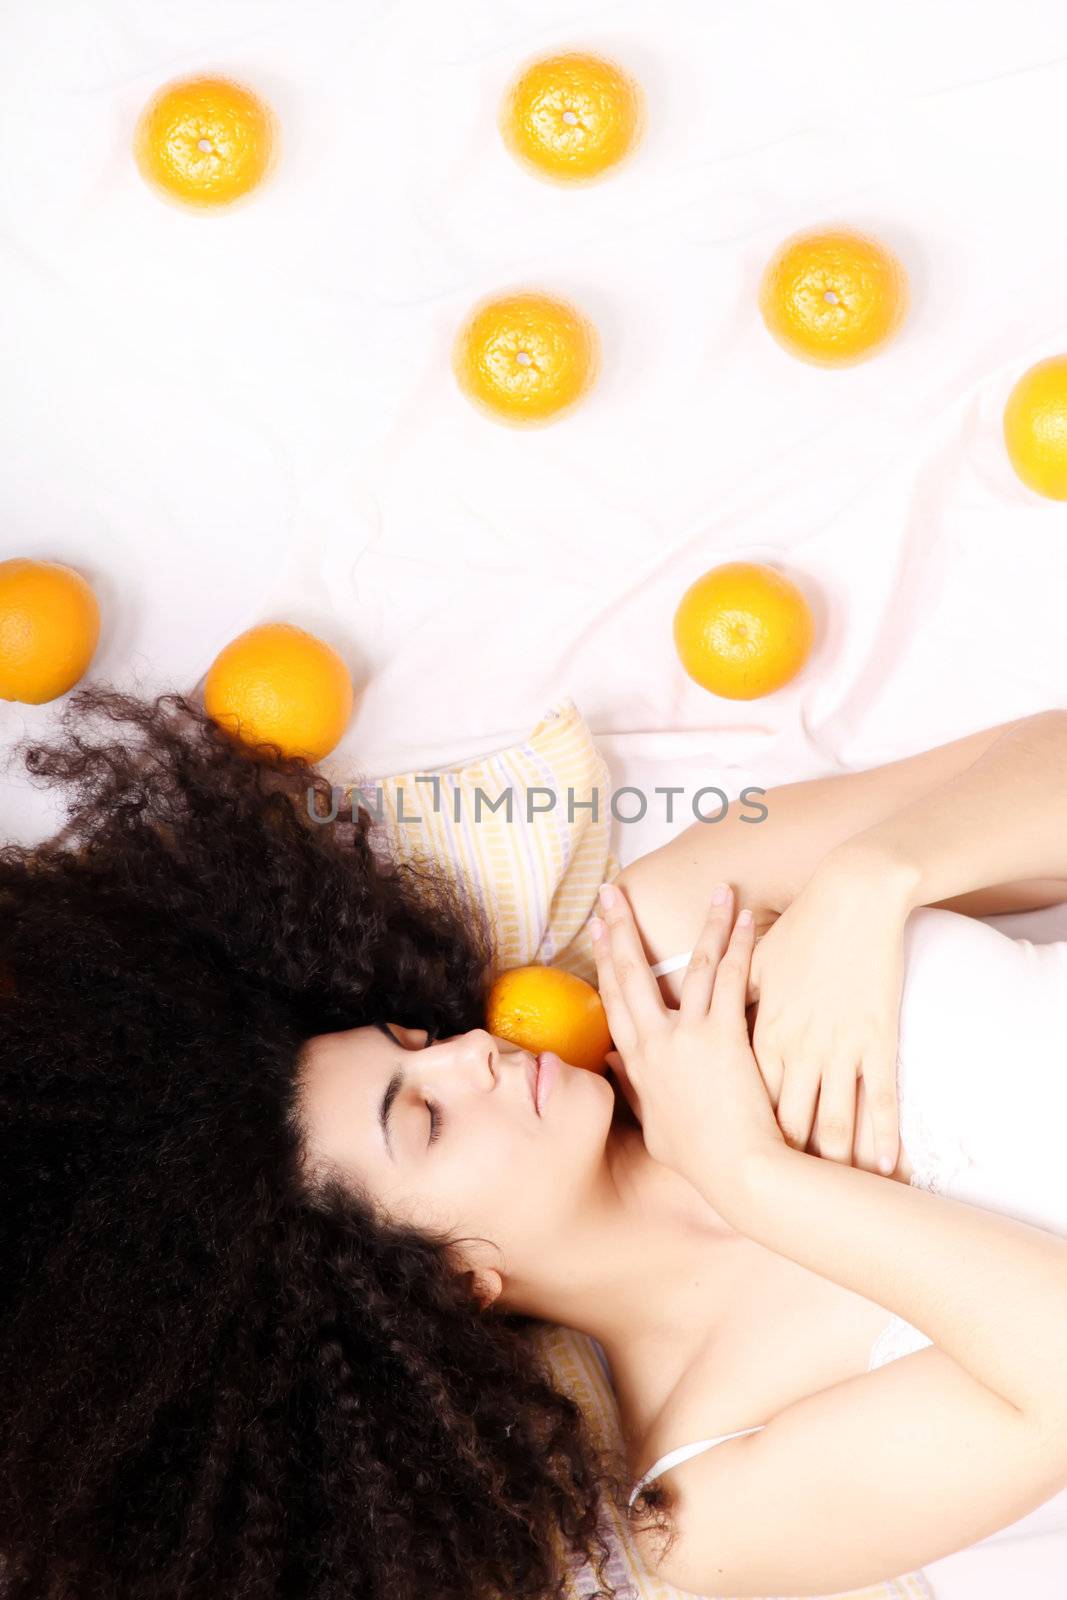 A young south american woman dreaming of fruits.